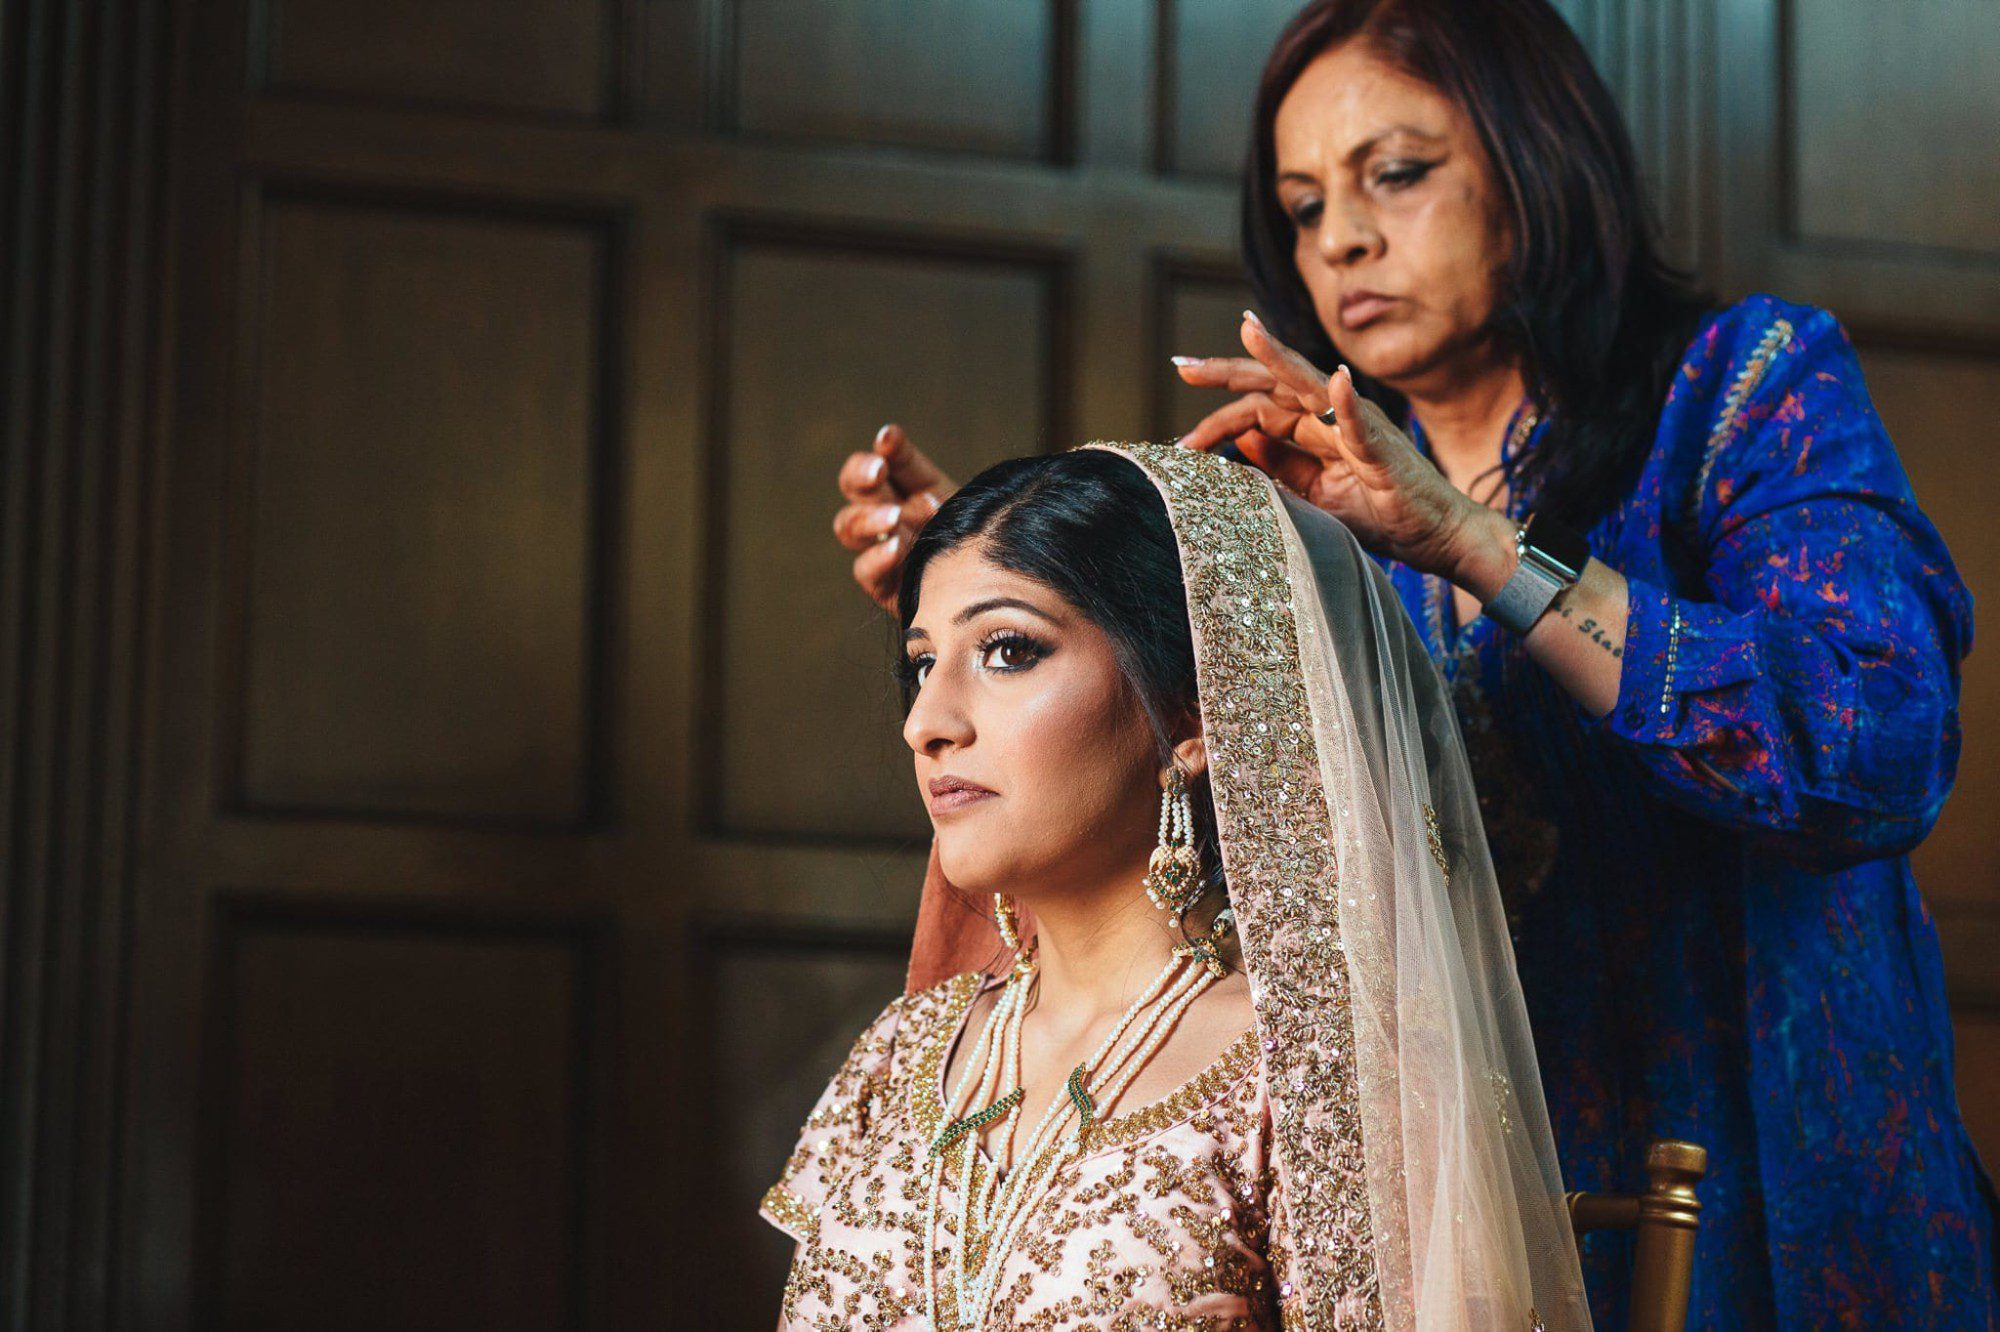 Indian bride getting ready at Masonic Temple Detroit, MI